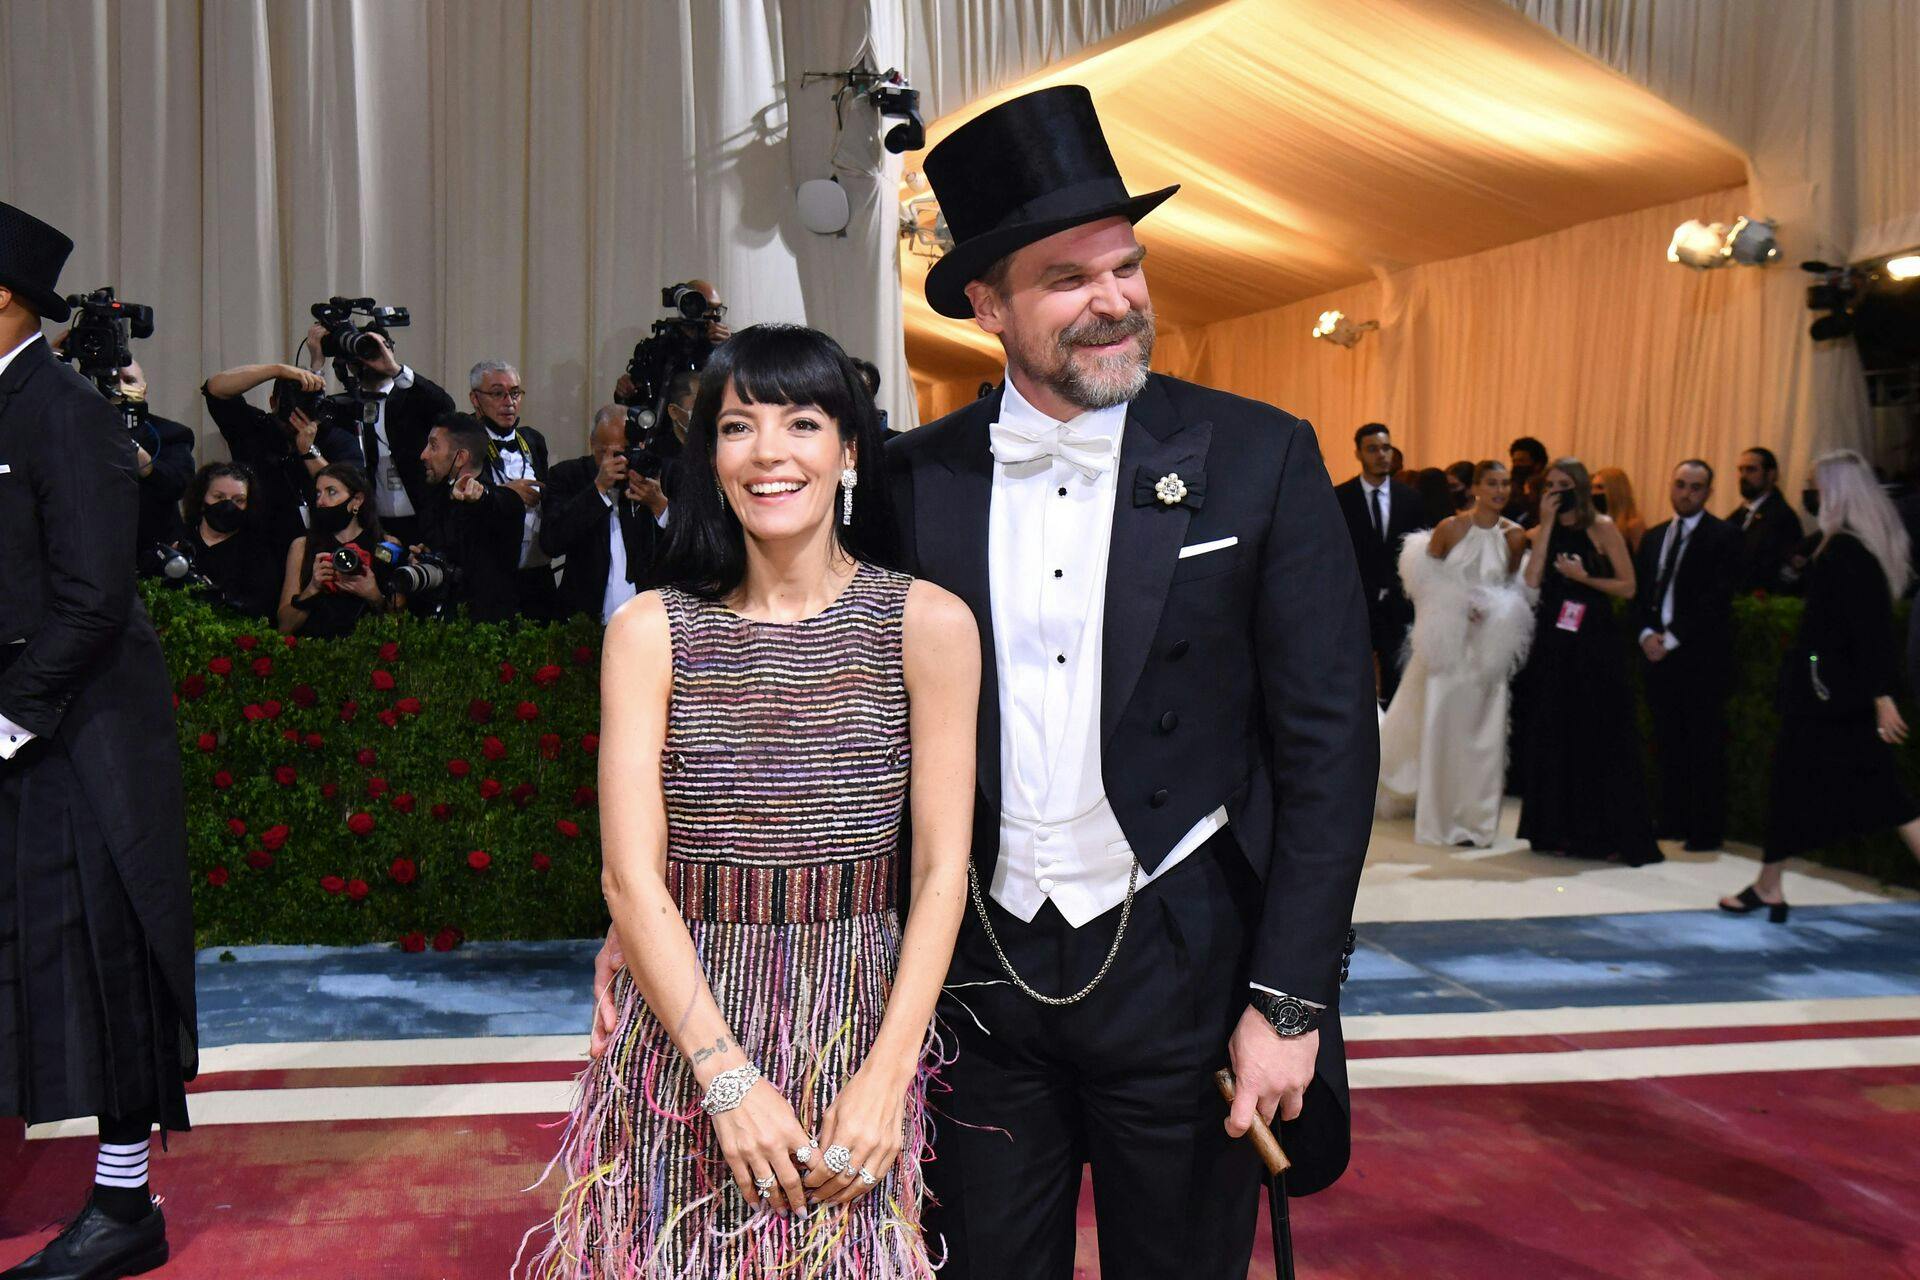 English singer-somgwriter Lily Allen and US actor David Harbour arrive for the 2022 Met Gala at the Metropolitan Museum of Art on May 2, 2022, in New York. - The Gala raises money for the Metropolitan Museum of Art's Costume Institute. The Gala's 2022 theme is "In America: An Anthology of Fashion". (Photo by ANGELA WEISS / AFP)